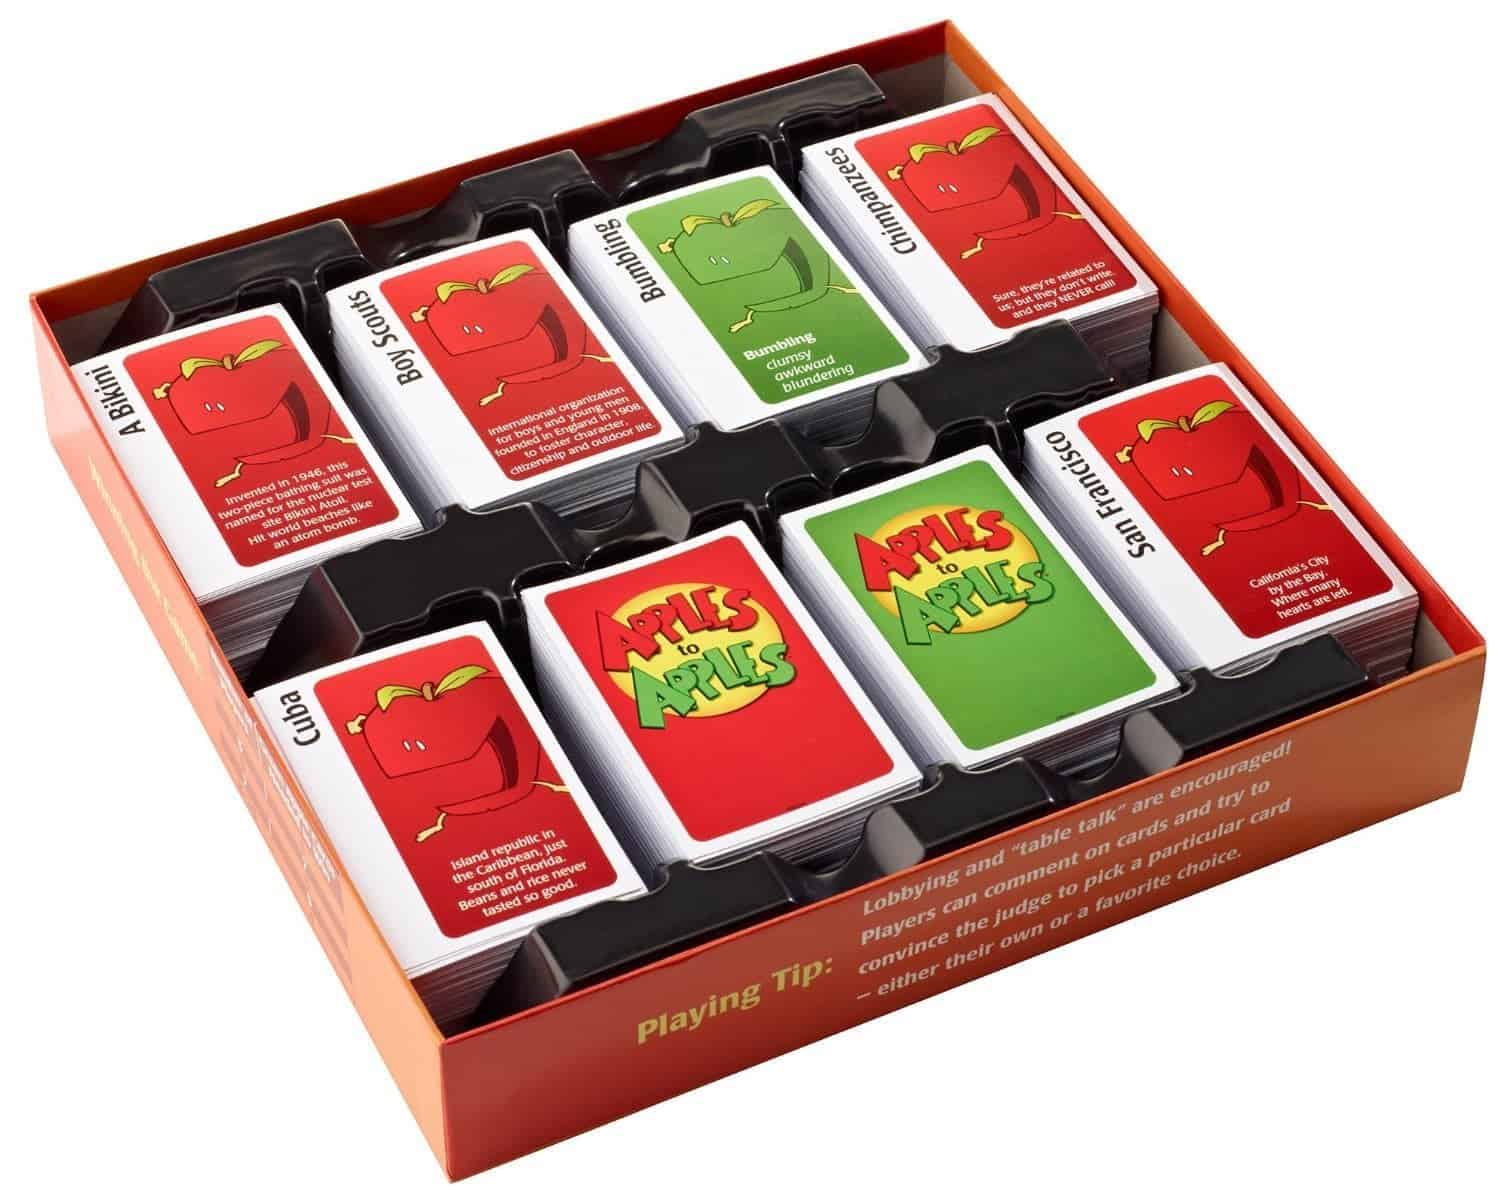 10+ Amazing Card Games for your Family: Apples to Apples | www.thepinningmama.com